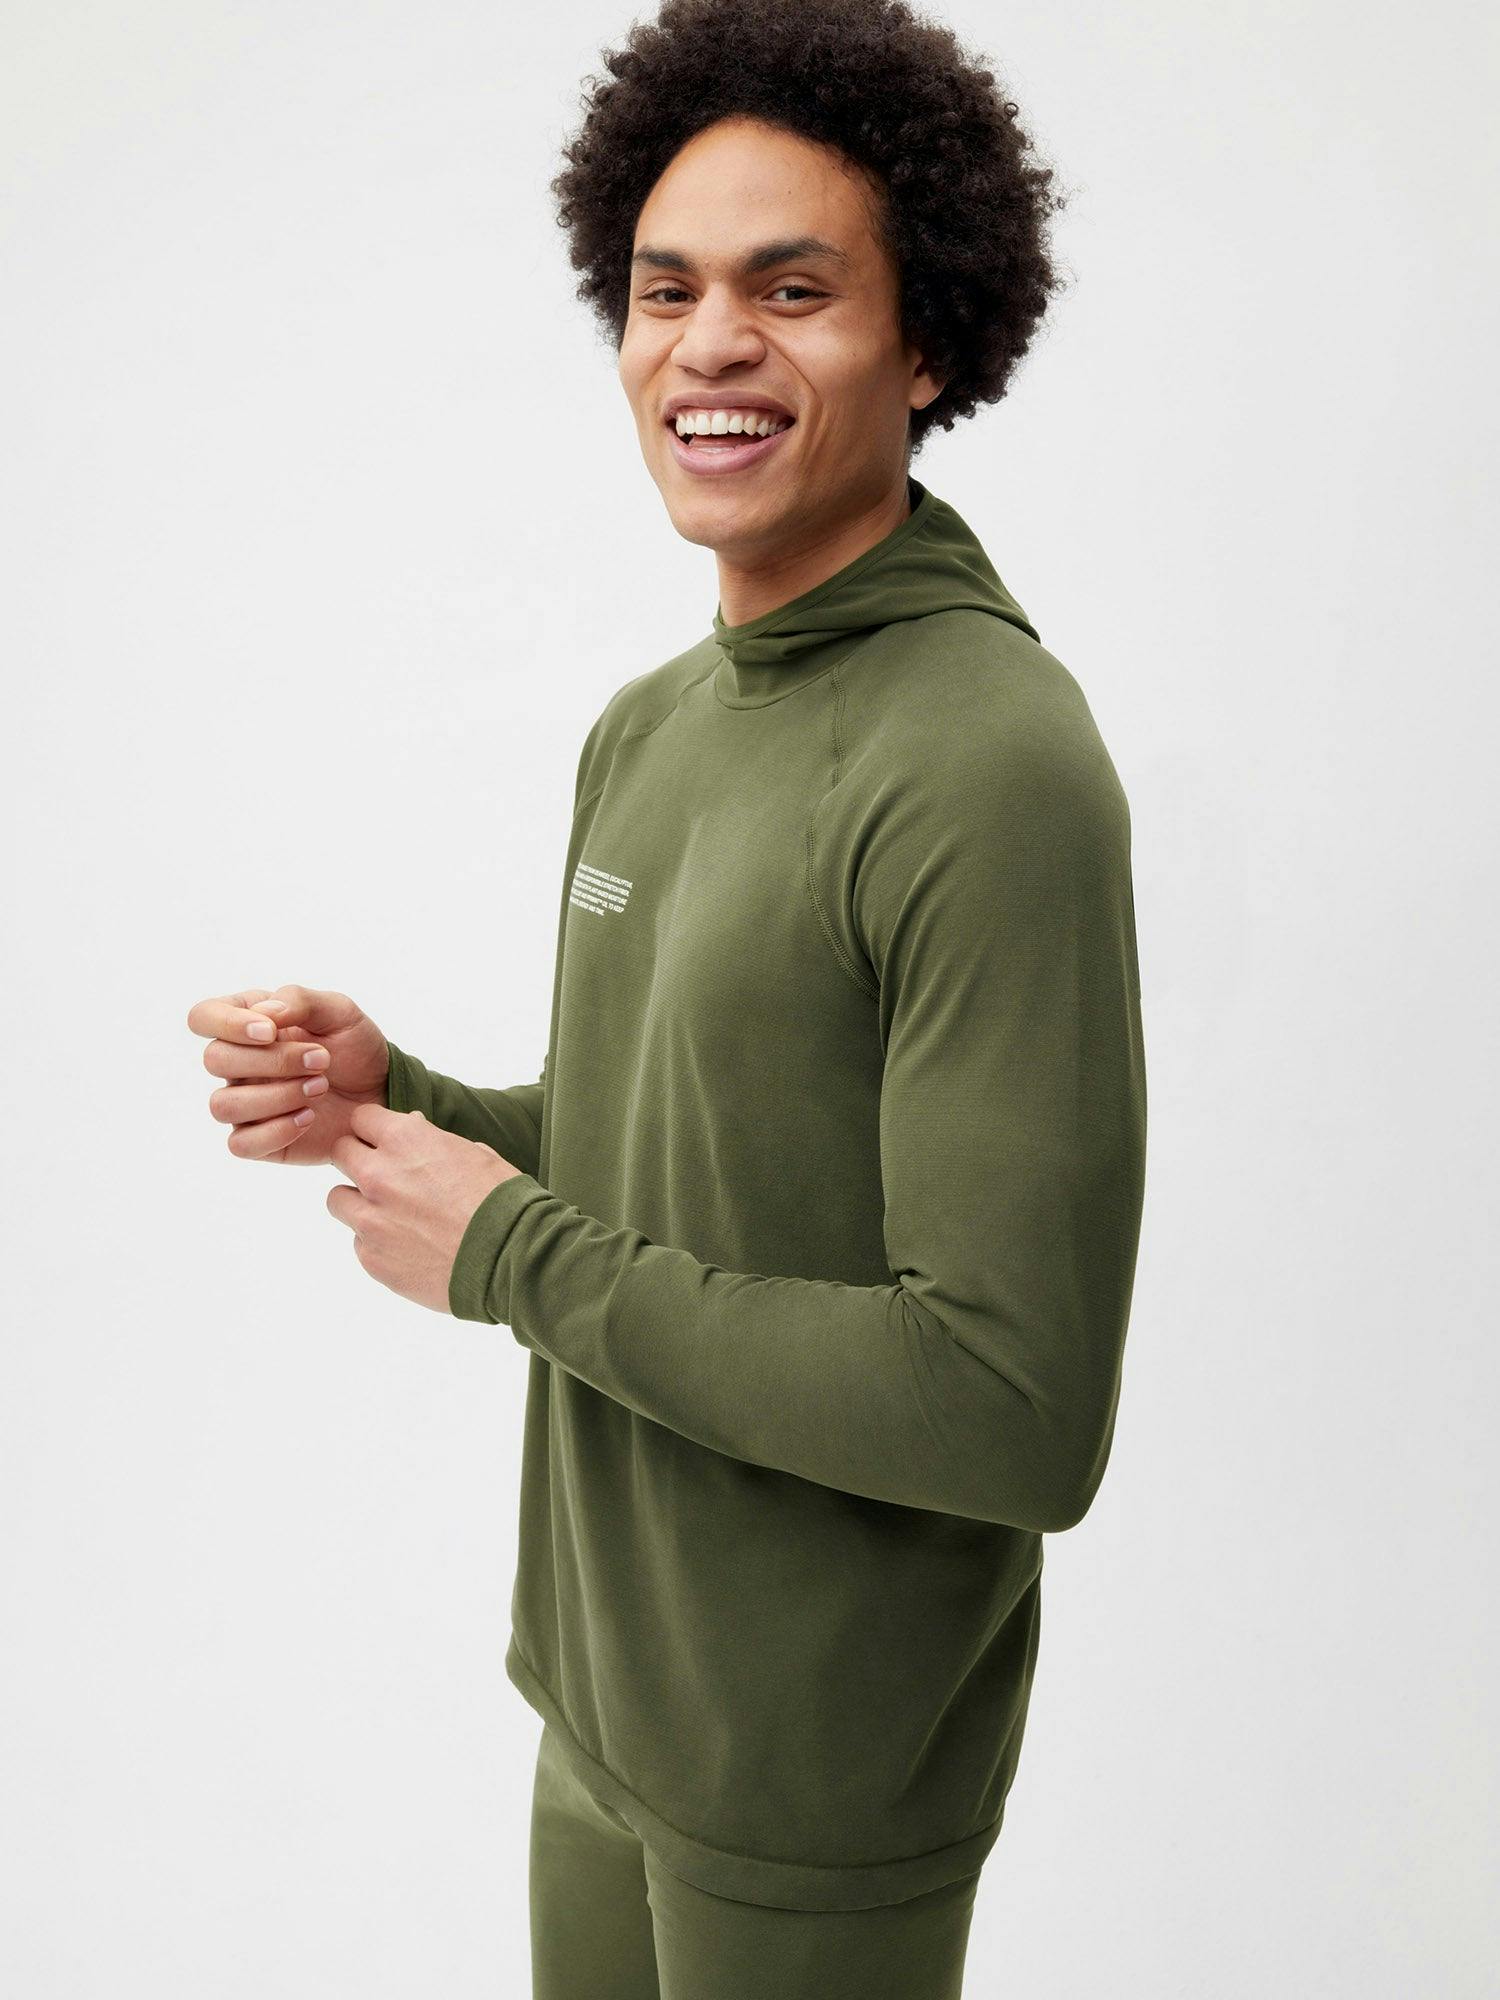 https://cdn.shopify.com/s/files/1/0035/1309/0115/products/Activewear-Mens-Hoodie-Rosemary-Green-4.jpg?v=1662475878